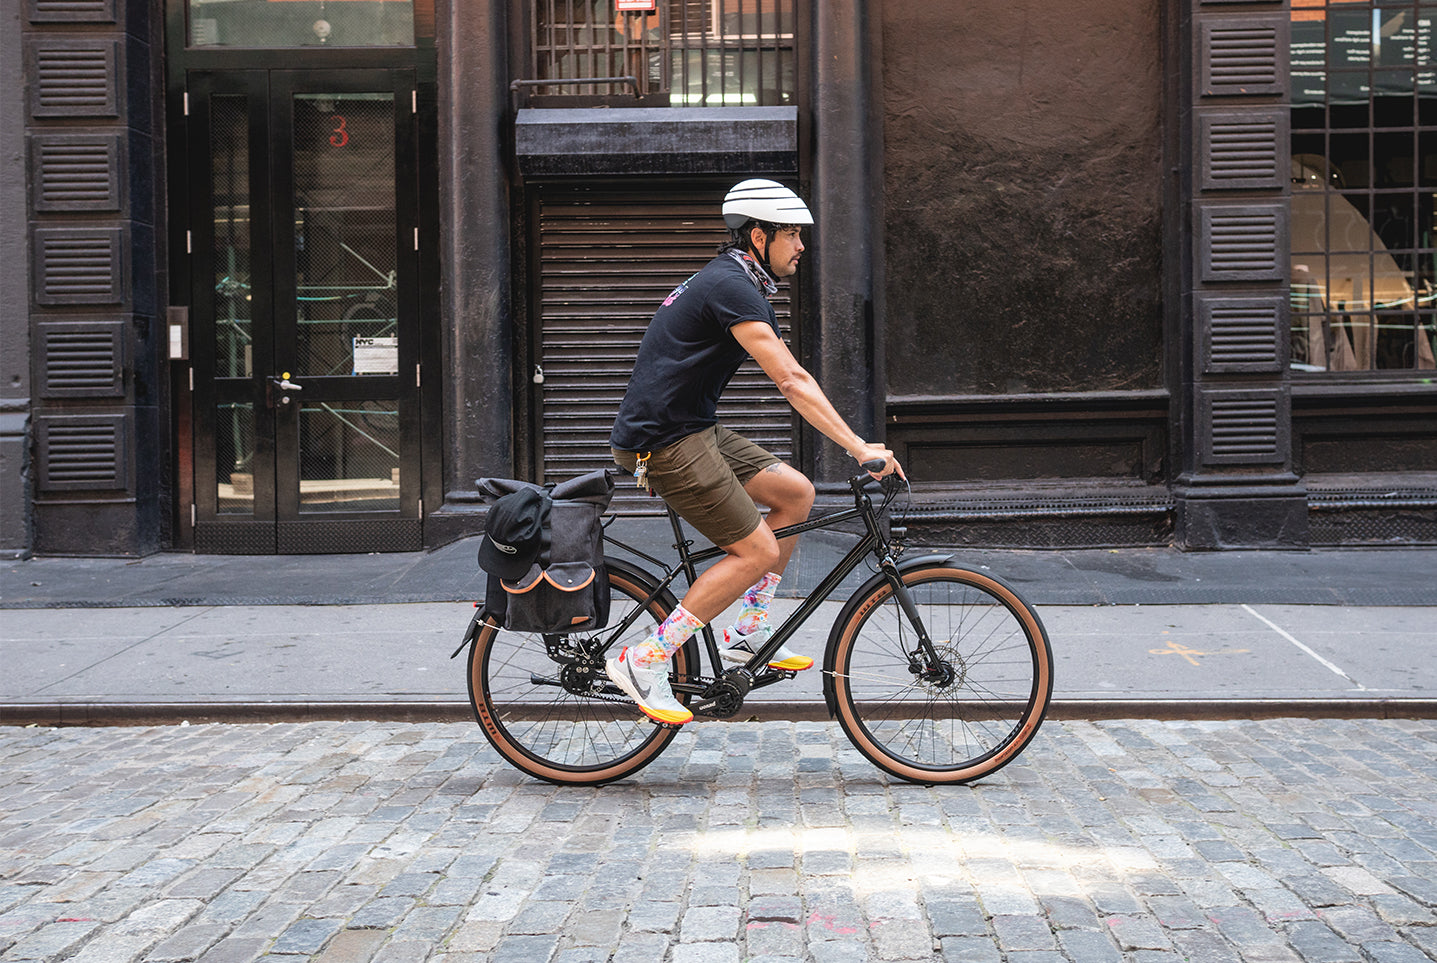 174HUDSON Pannier Backpack on a Priority Bicycle